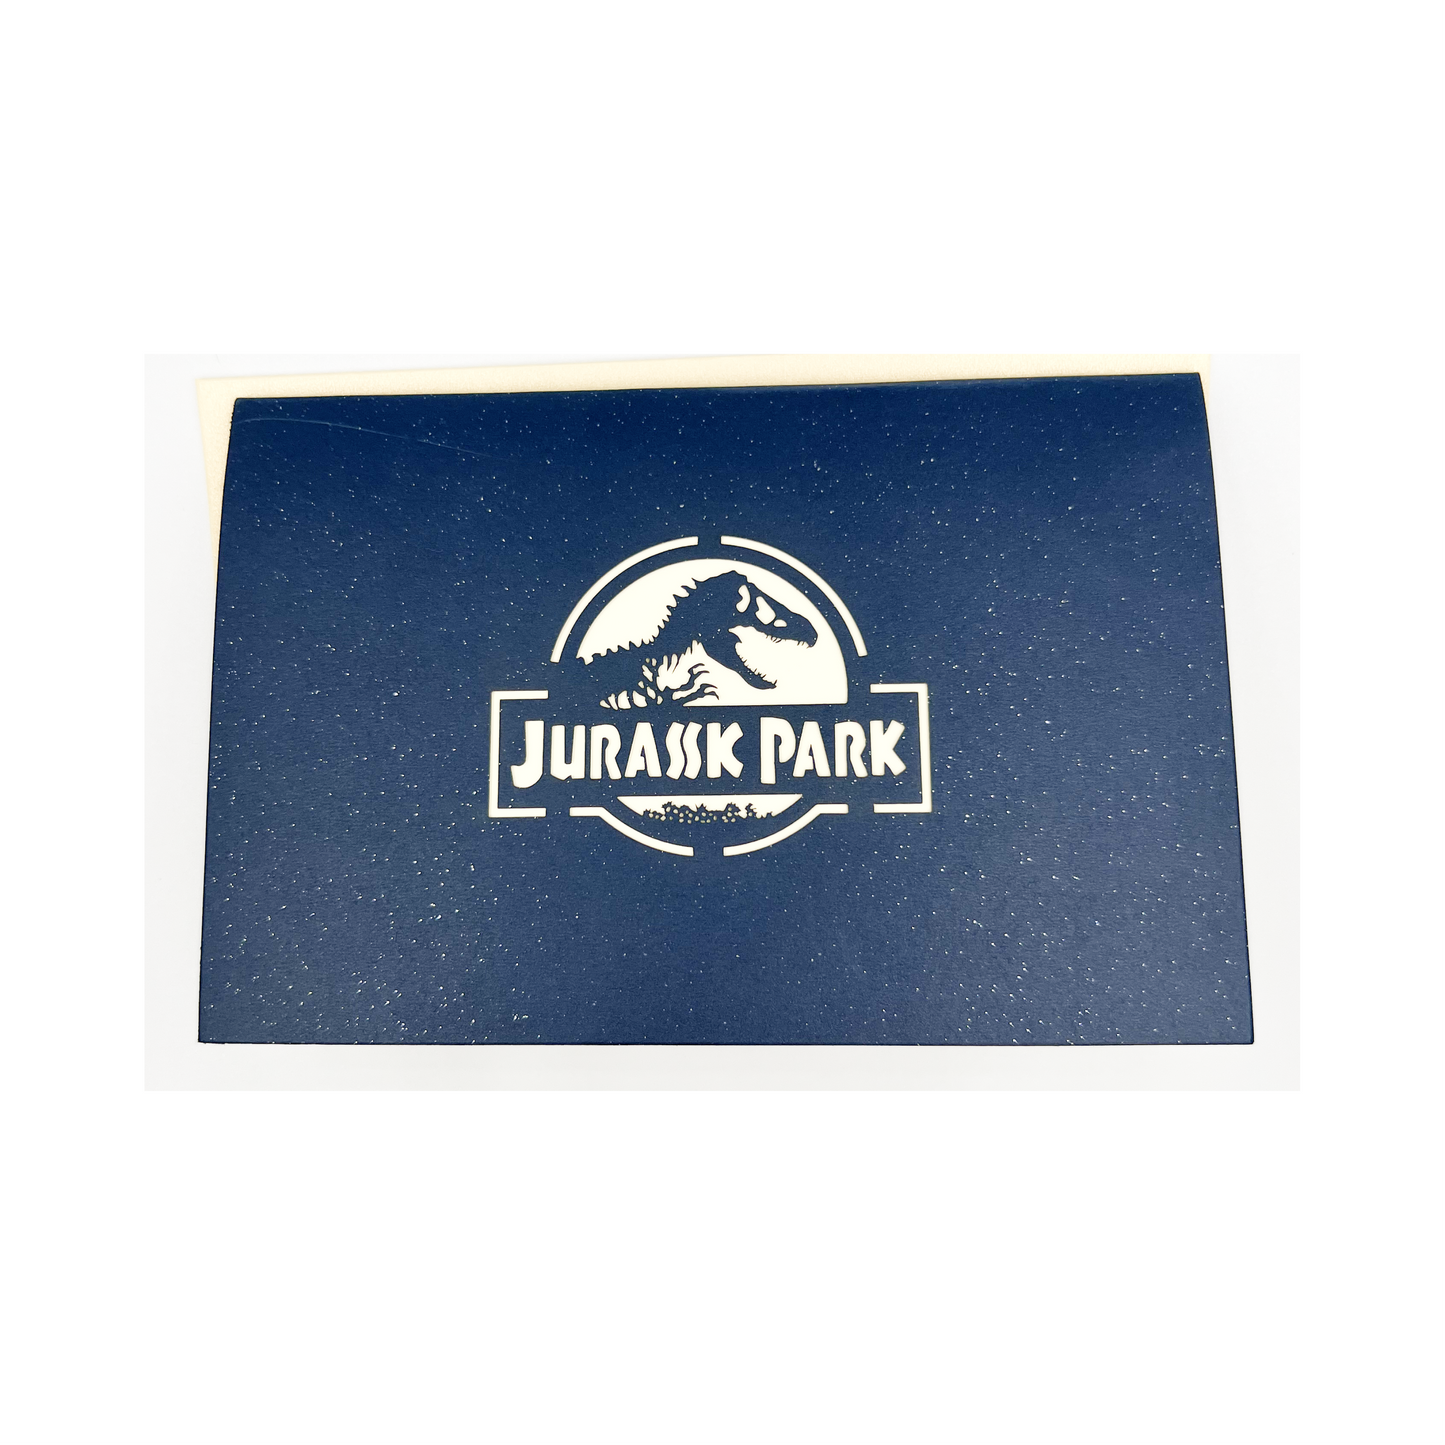 A2 - Jurassic Park 3D Pop Up Greeting Card With Envelope